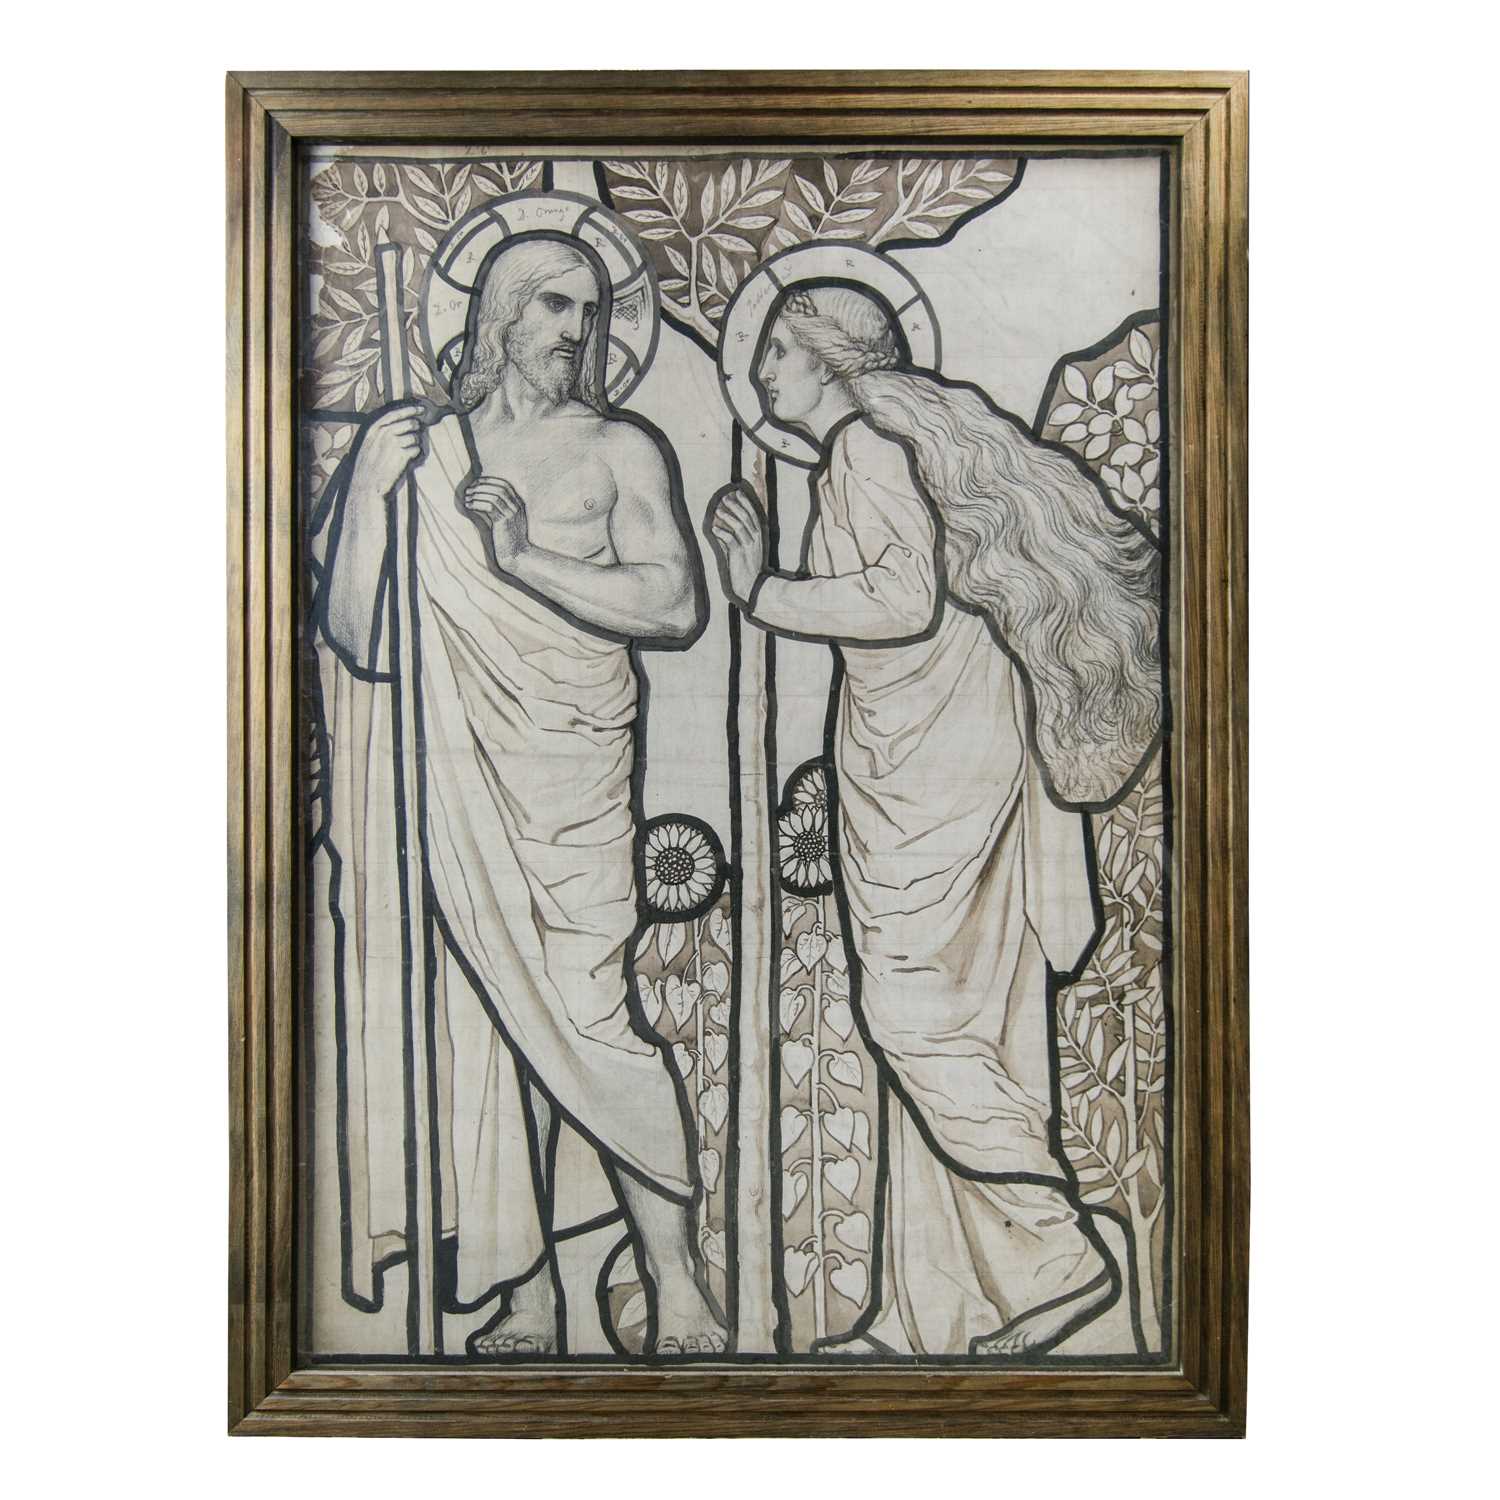 Harry Ellis Wooldridge (fl1860-1900) Mary and The Risen Christ, cartoon stained glass design for